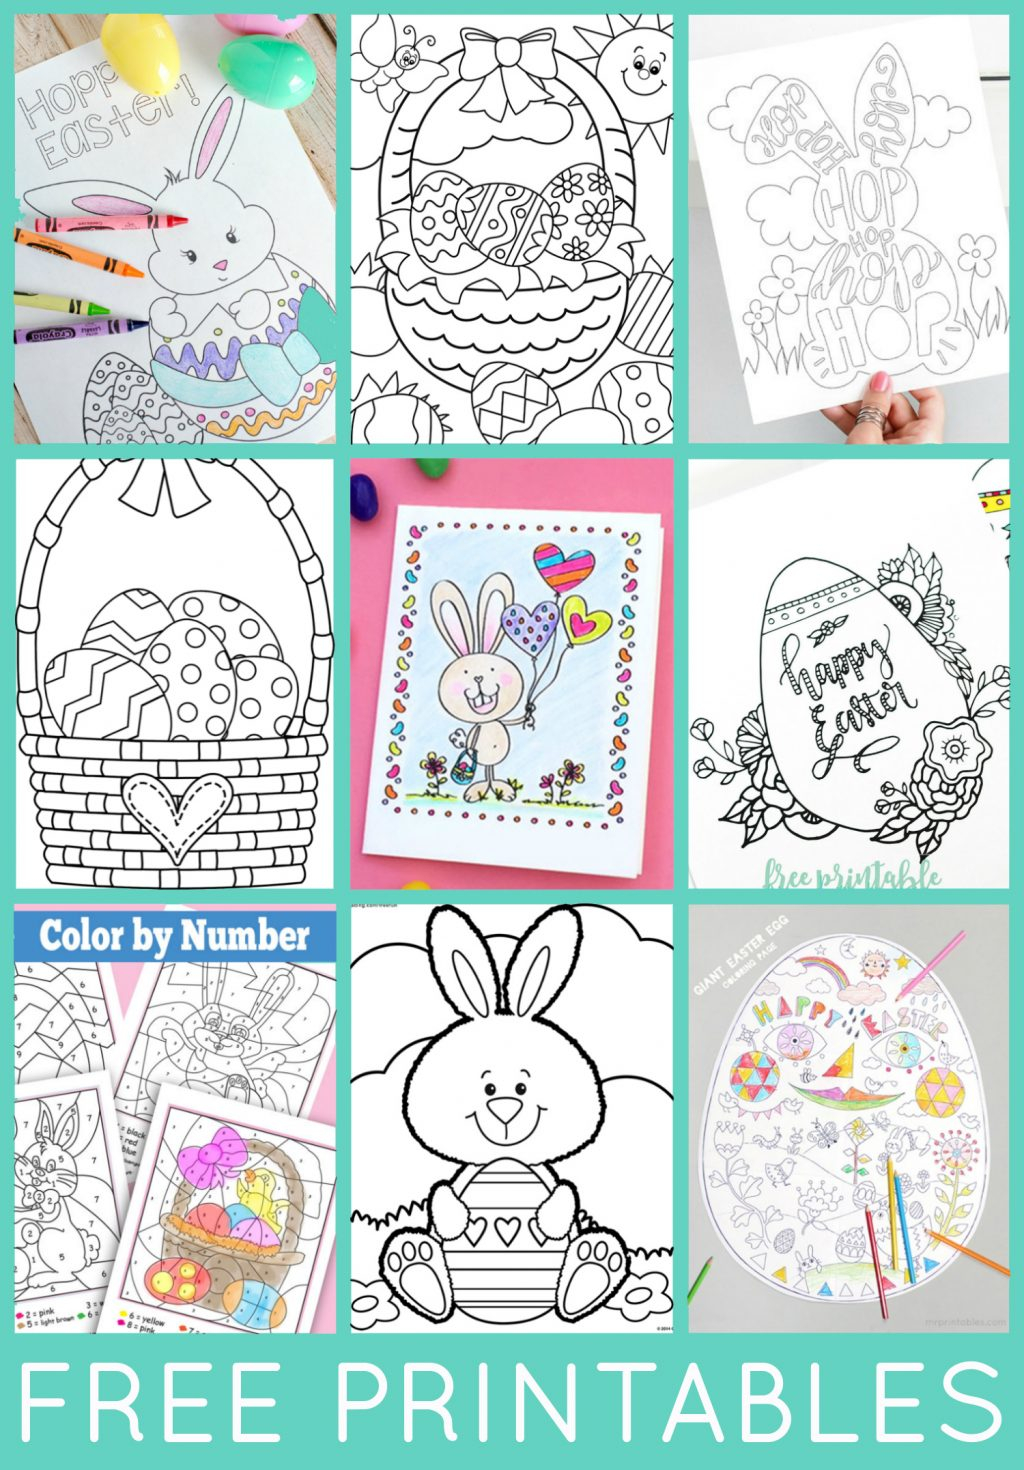 Jesus Easter Coloring Pages Printable Coloring Pages Easter Coloring Books For Toddlers Food Coloring